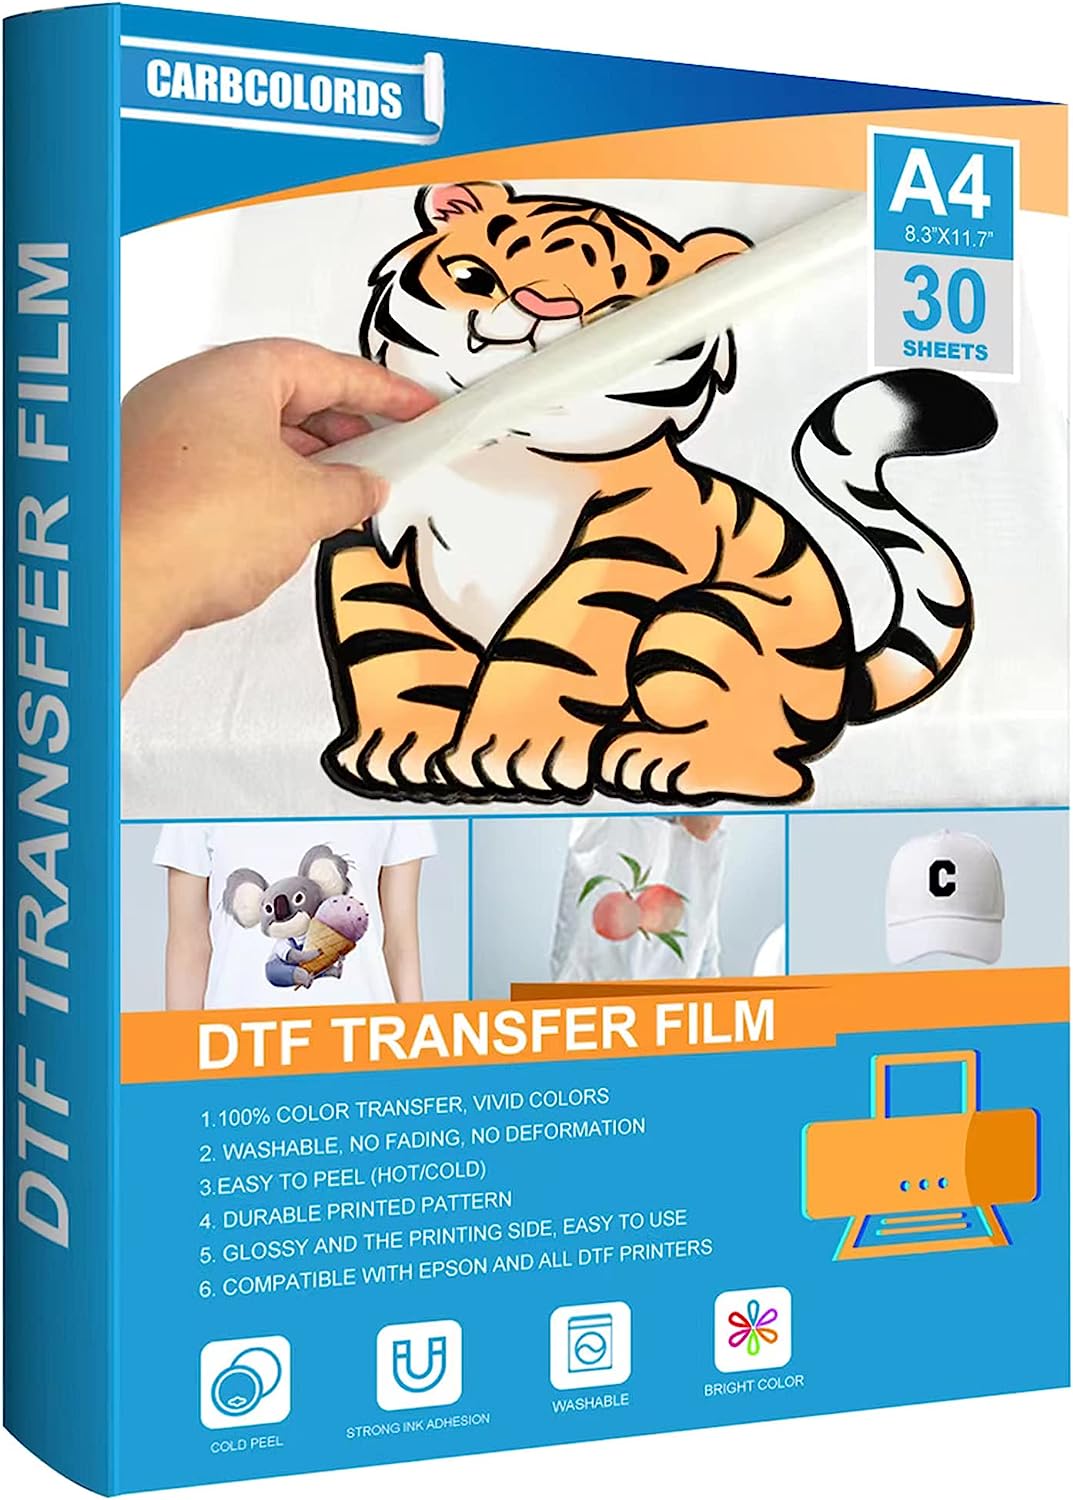 Carbcolords DTF Transfer Film-A4(8.3